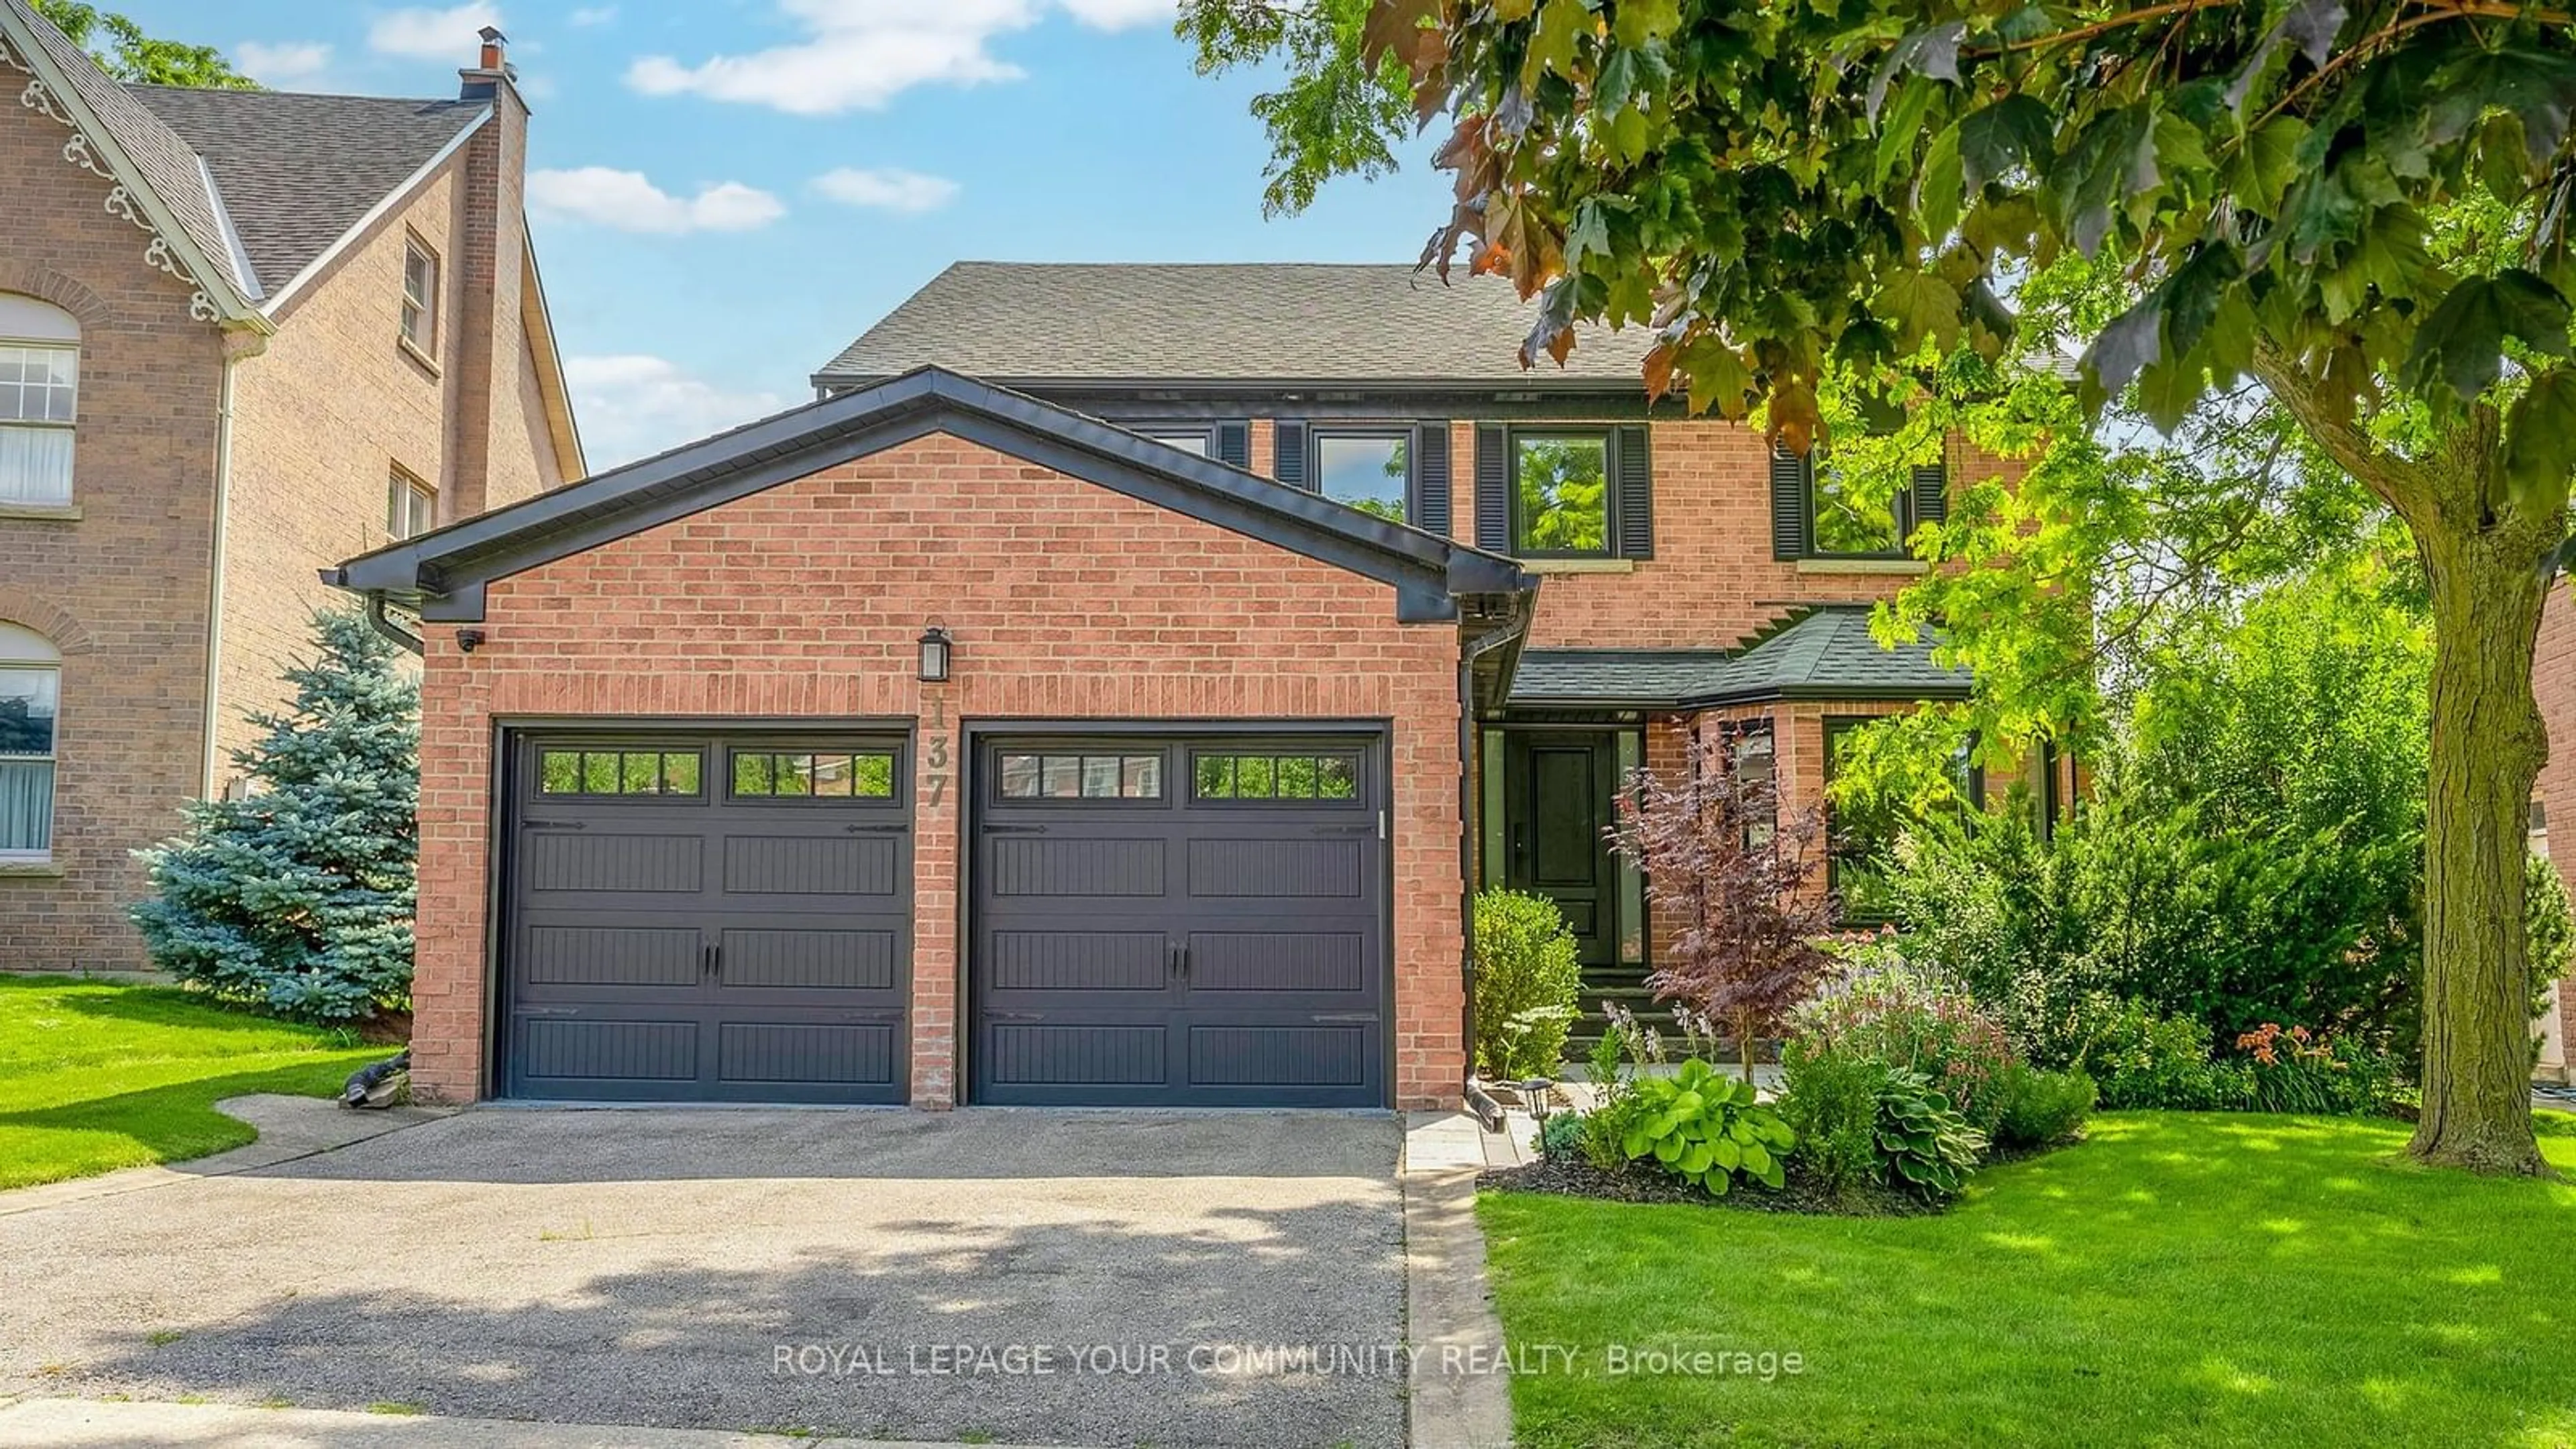 Home with brick exterior material for 137 Longwater Chse, Markham Ontario L3R 6C3